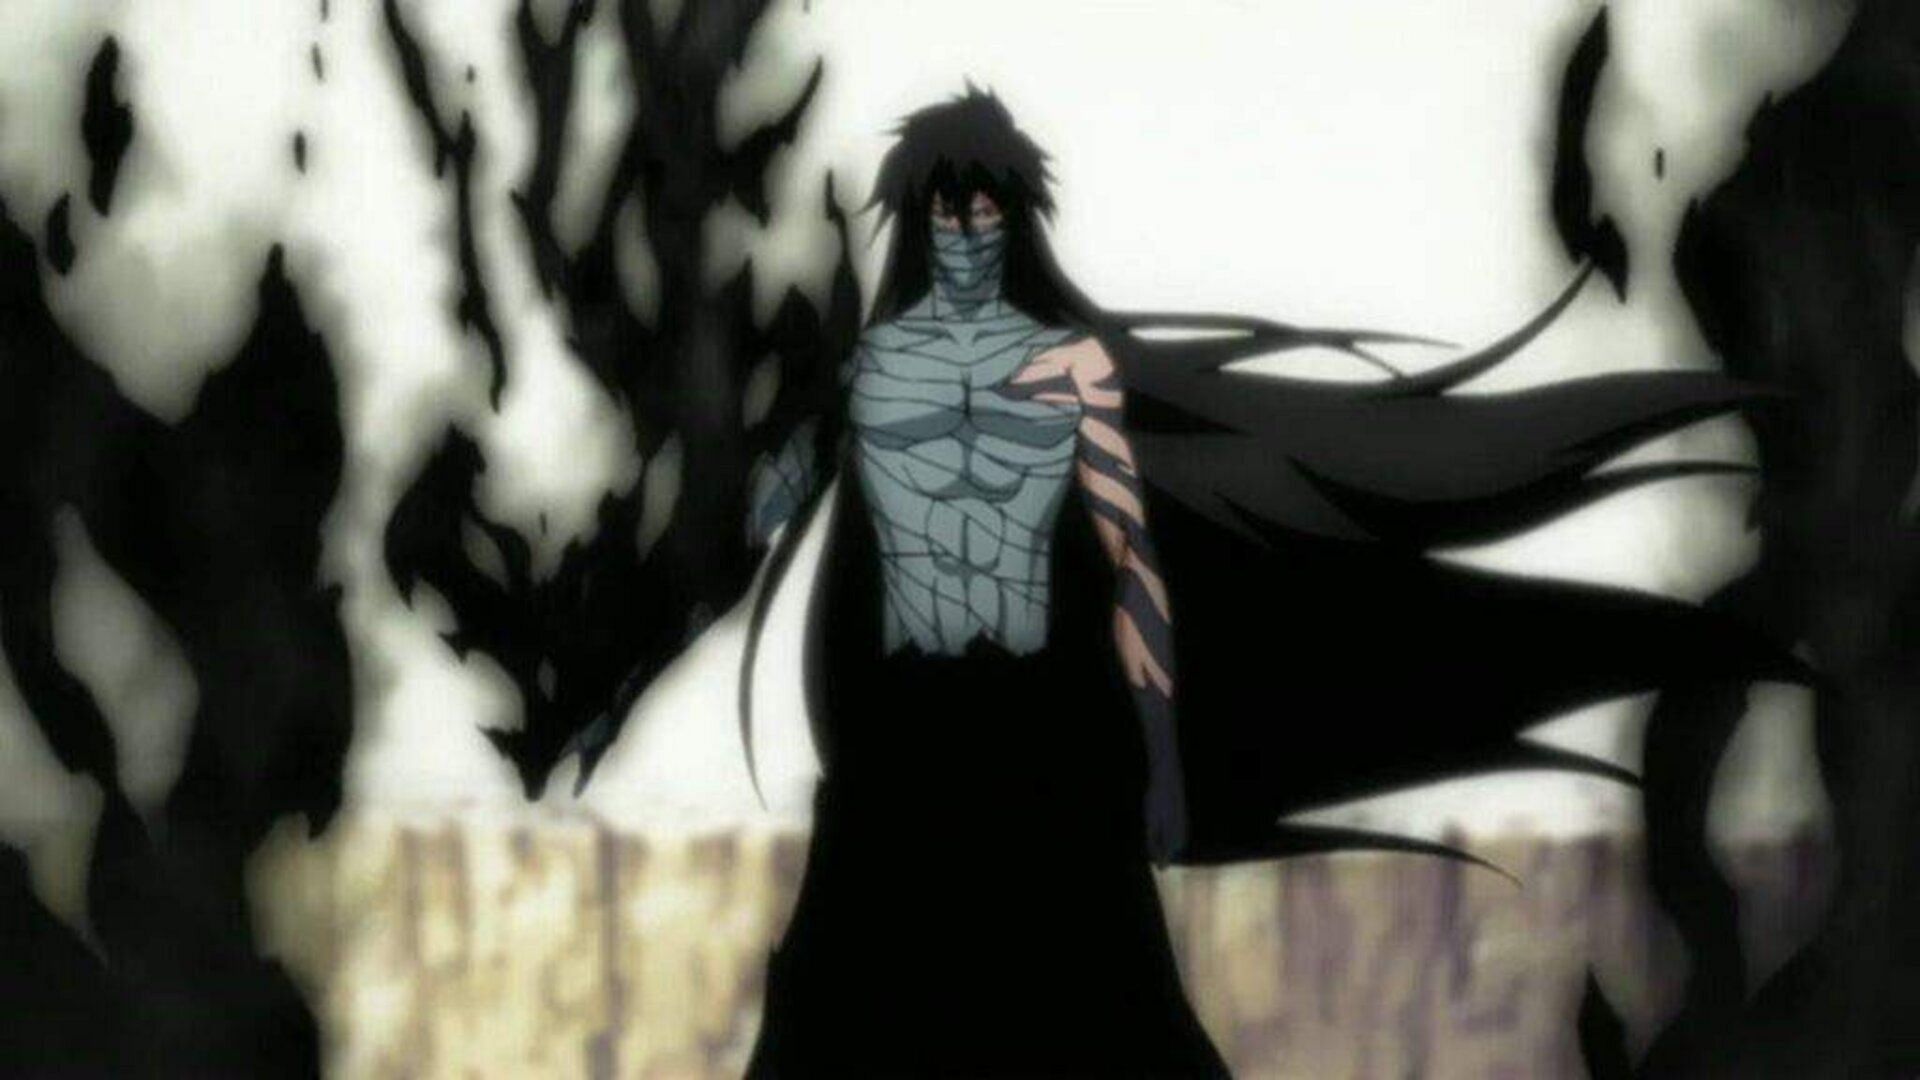 In What Episodes Does Ichigo Turn Into a Hollow?